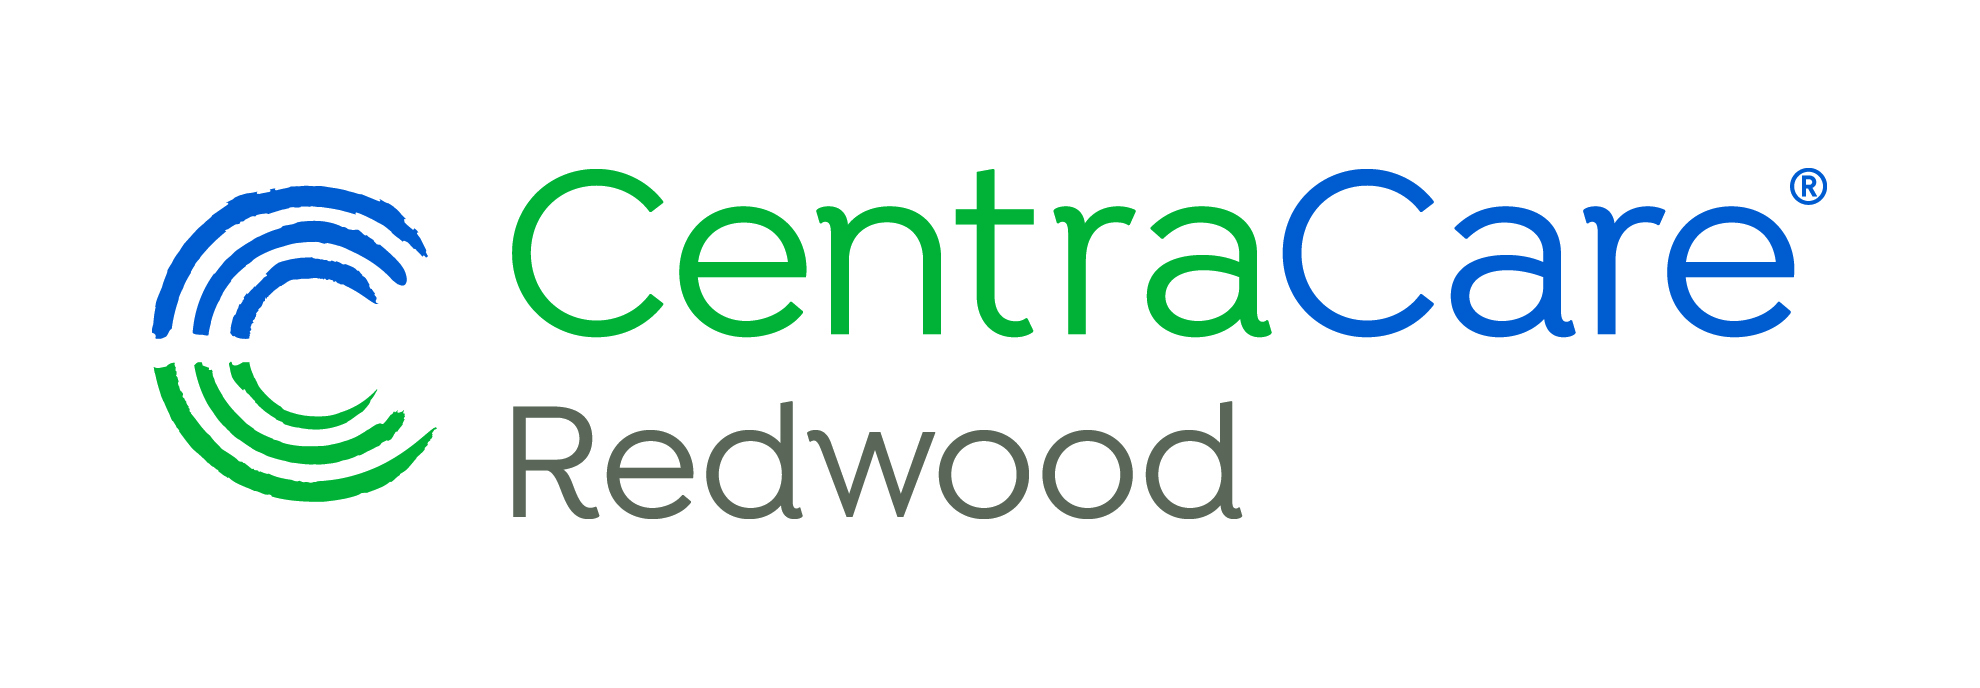 Centra Care - Redwood's Image